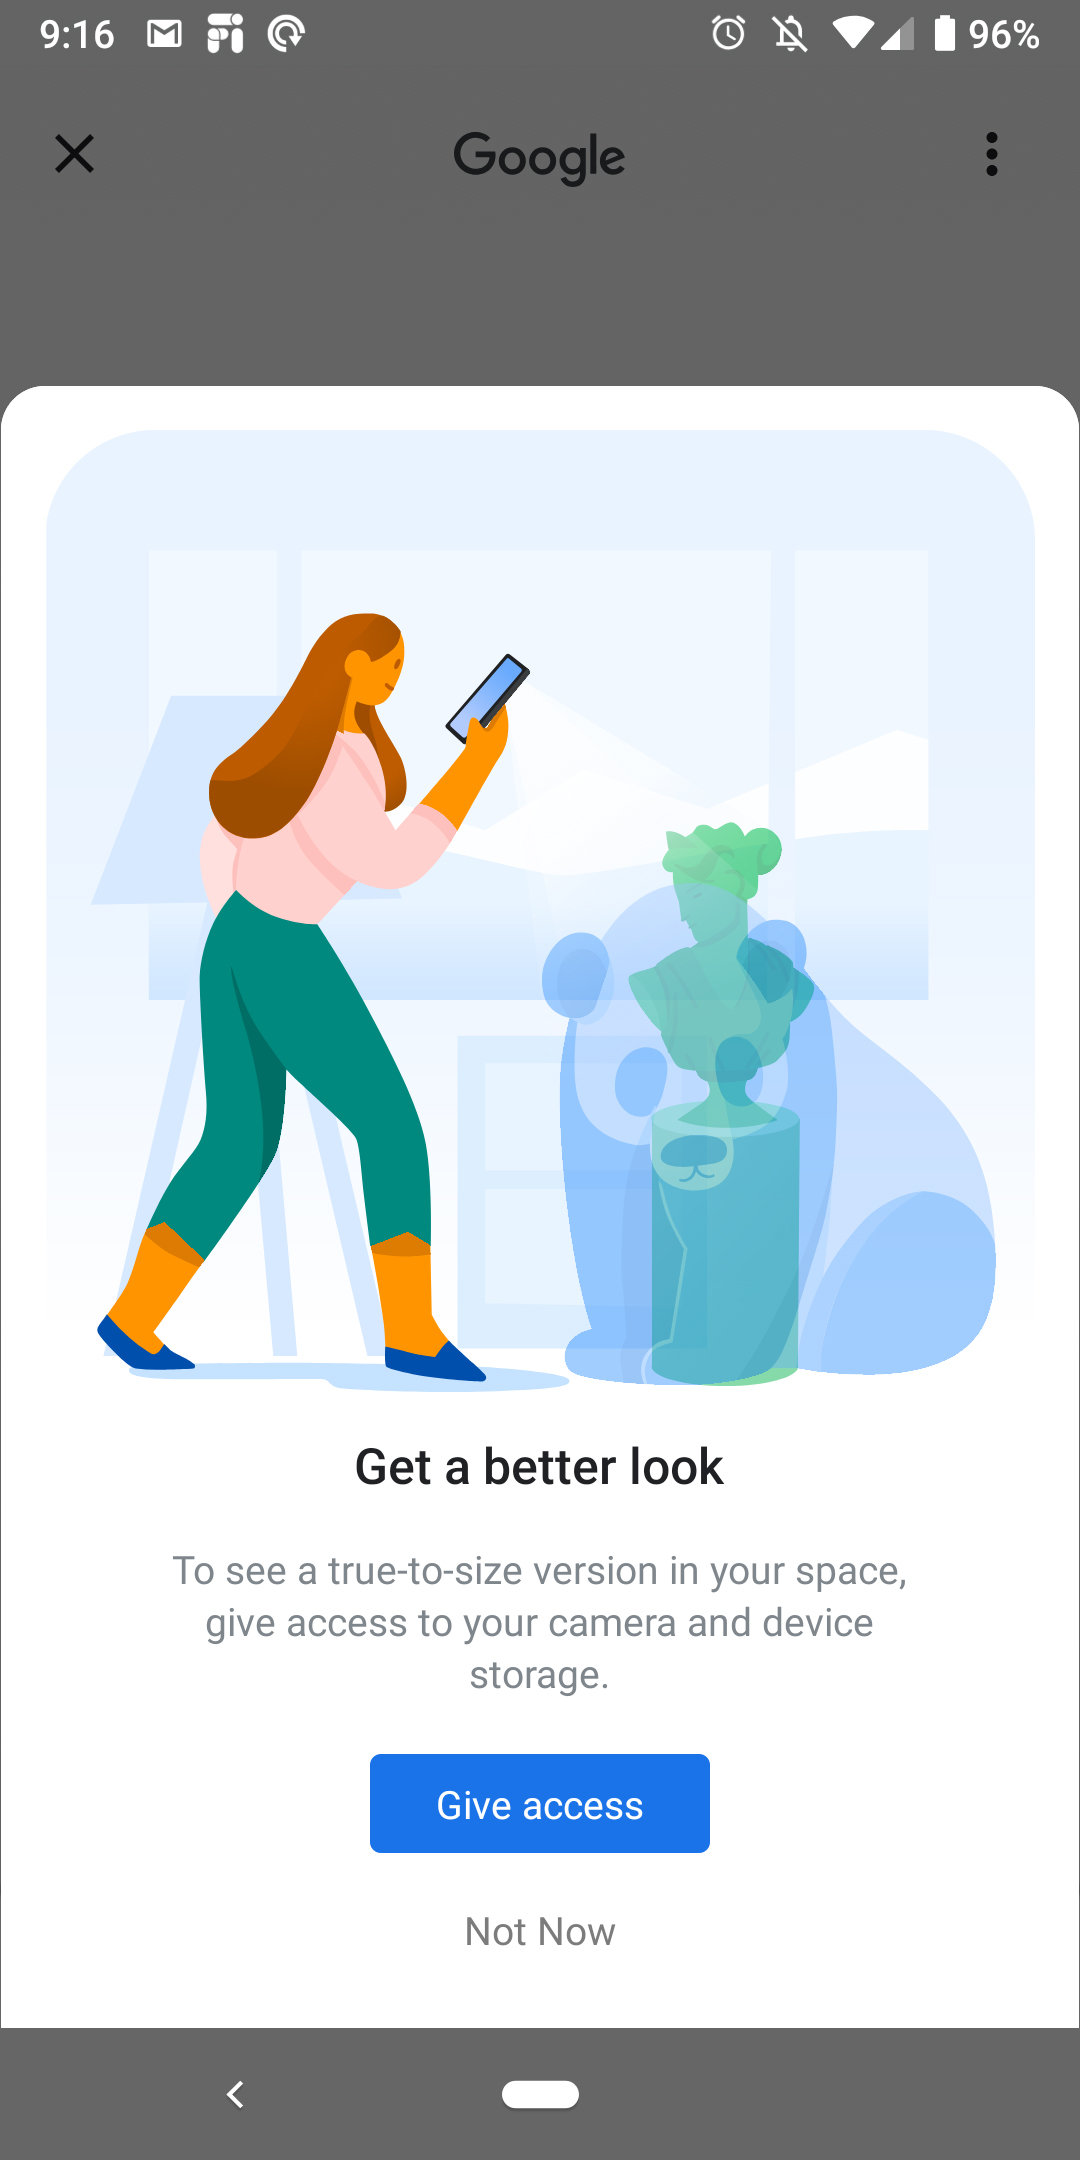 Google prompt to use AR features.